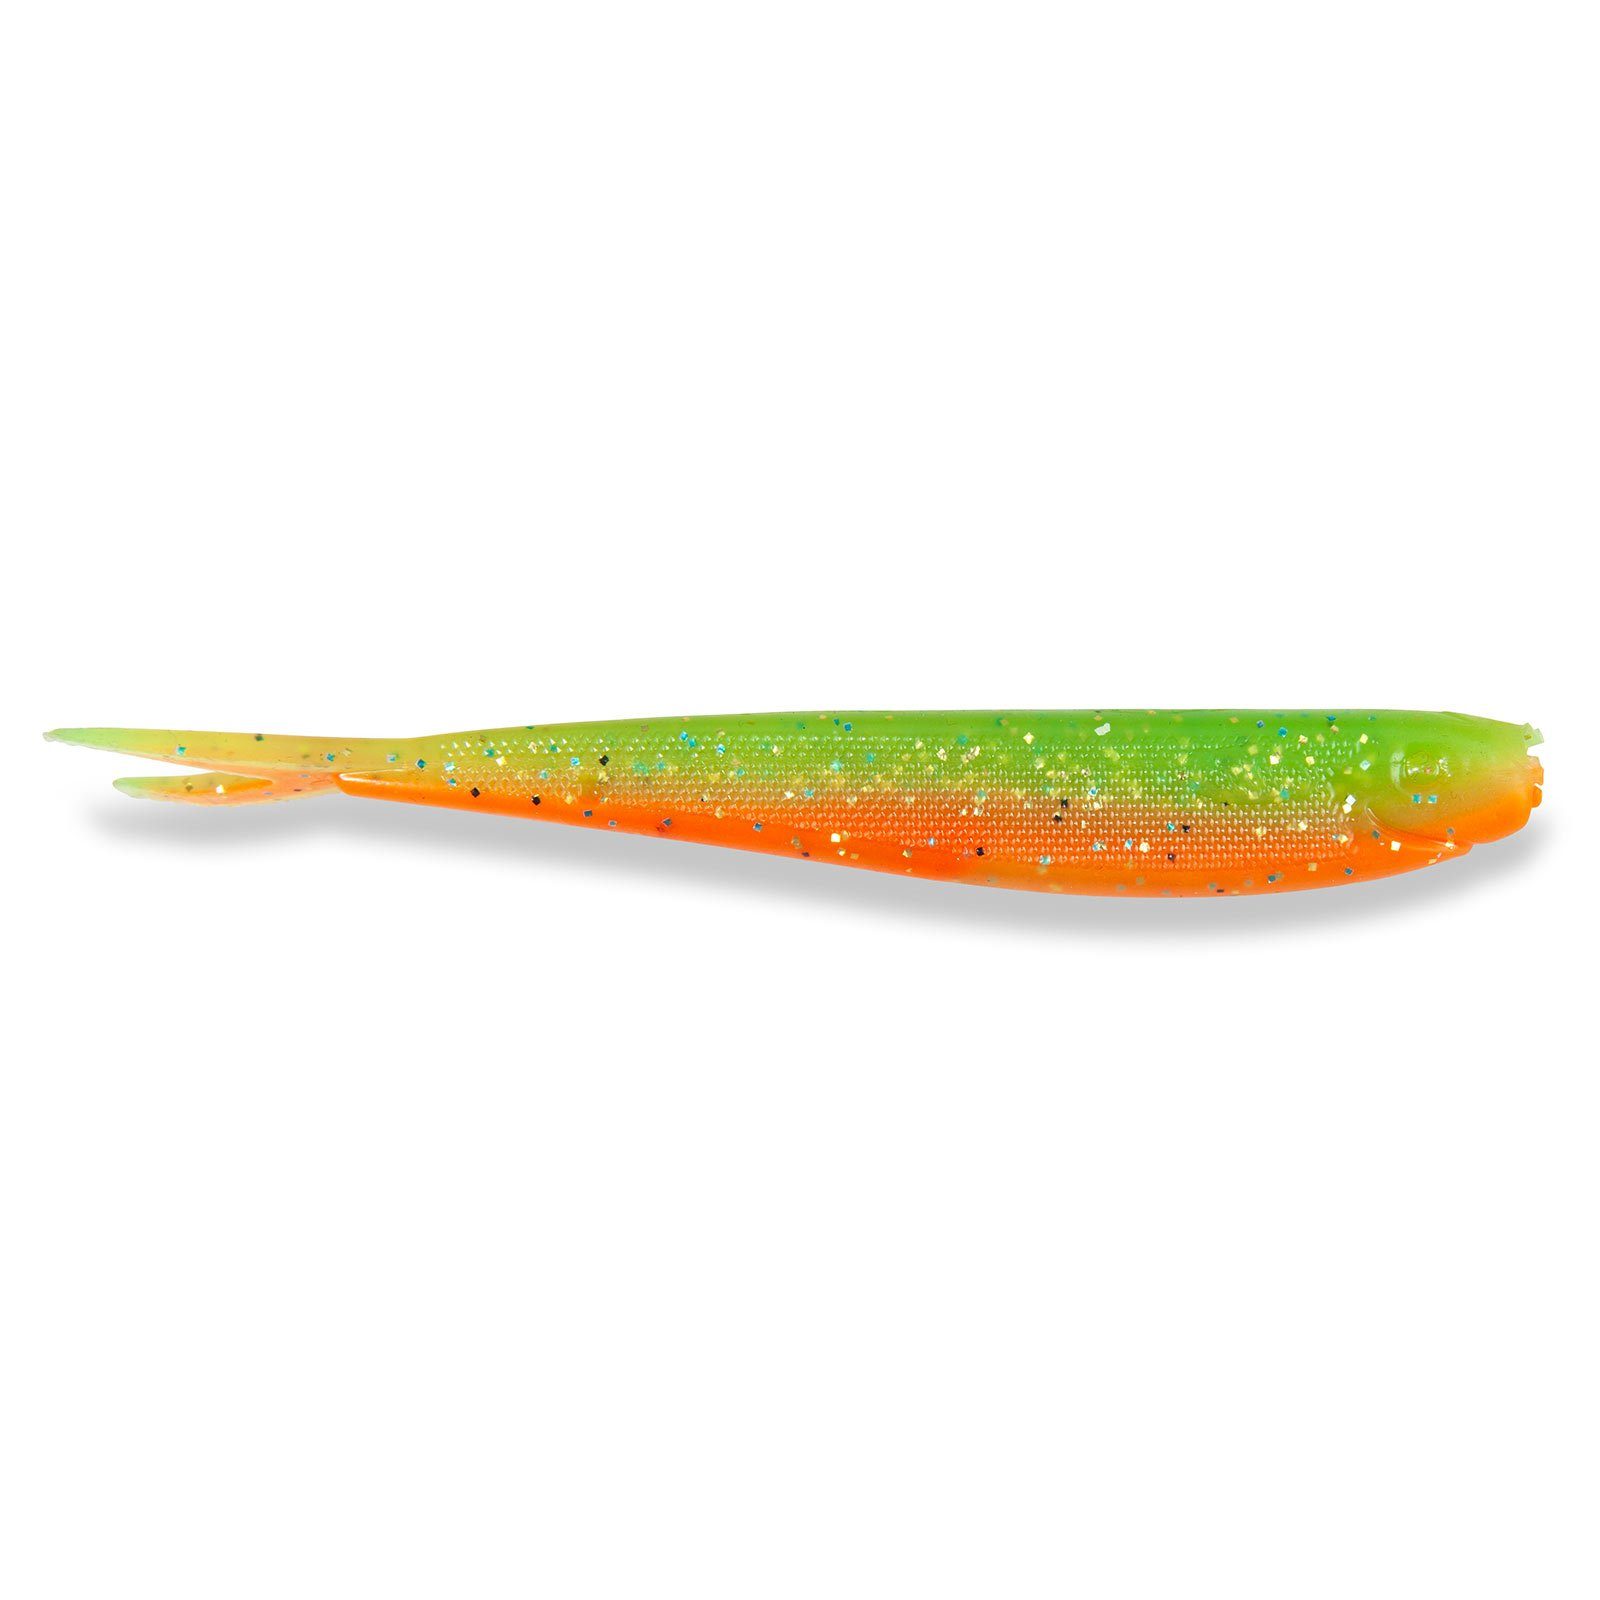 Moby Sänger UV Kunstköder, 1 2.0 Gummifische Iron Stk. Turtle Softbaits Moby V-Tail Claw Toxic Non 19cm Green